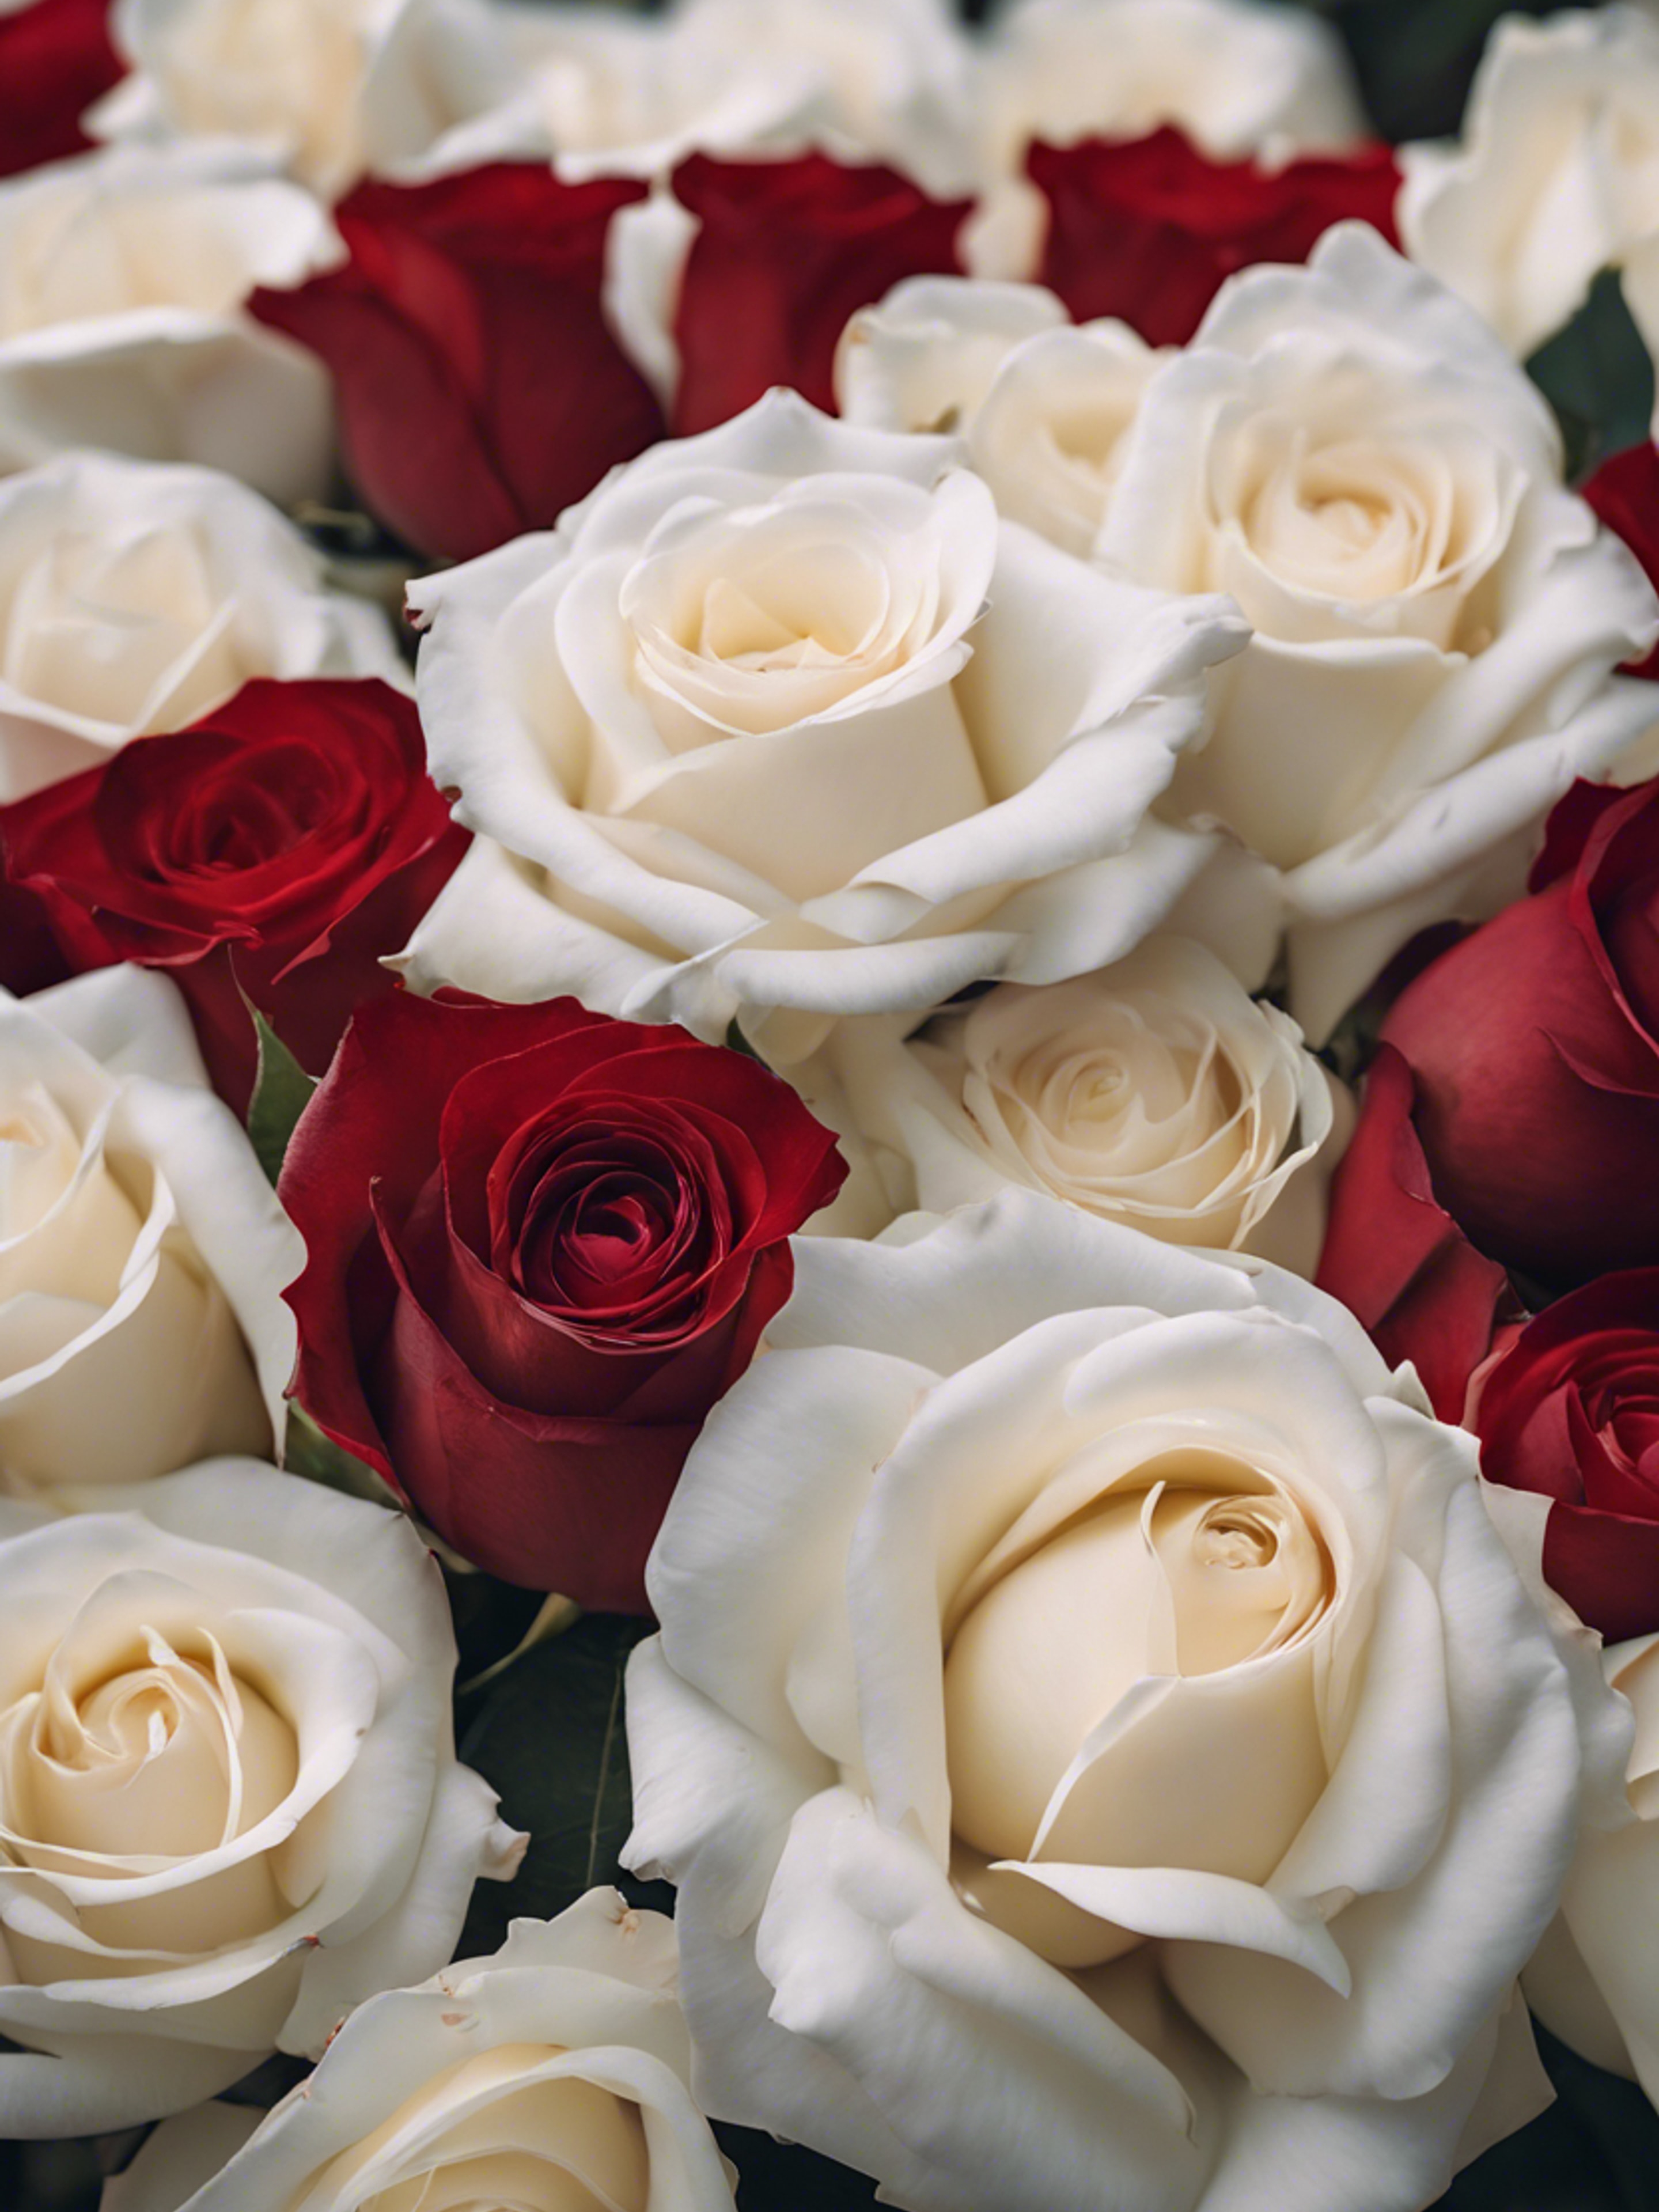 A cluster of white roses with a single red rose nestled in the middle. Wallpaper[ffa8b13685ab483b9eca]